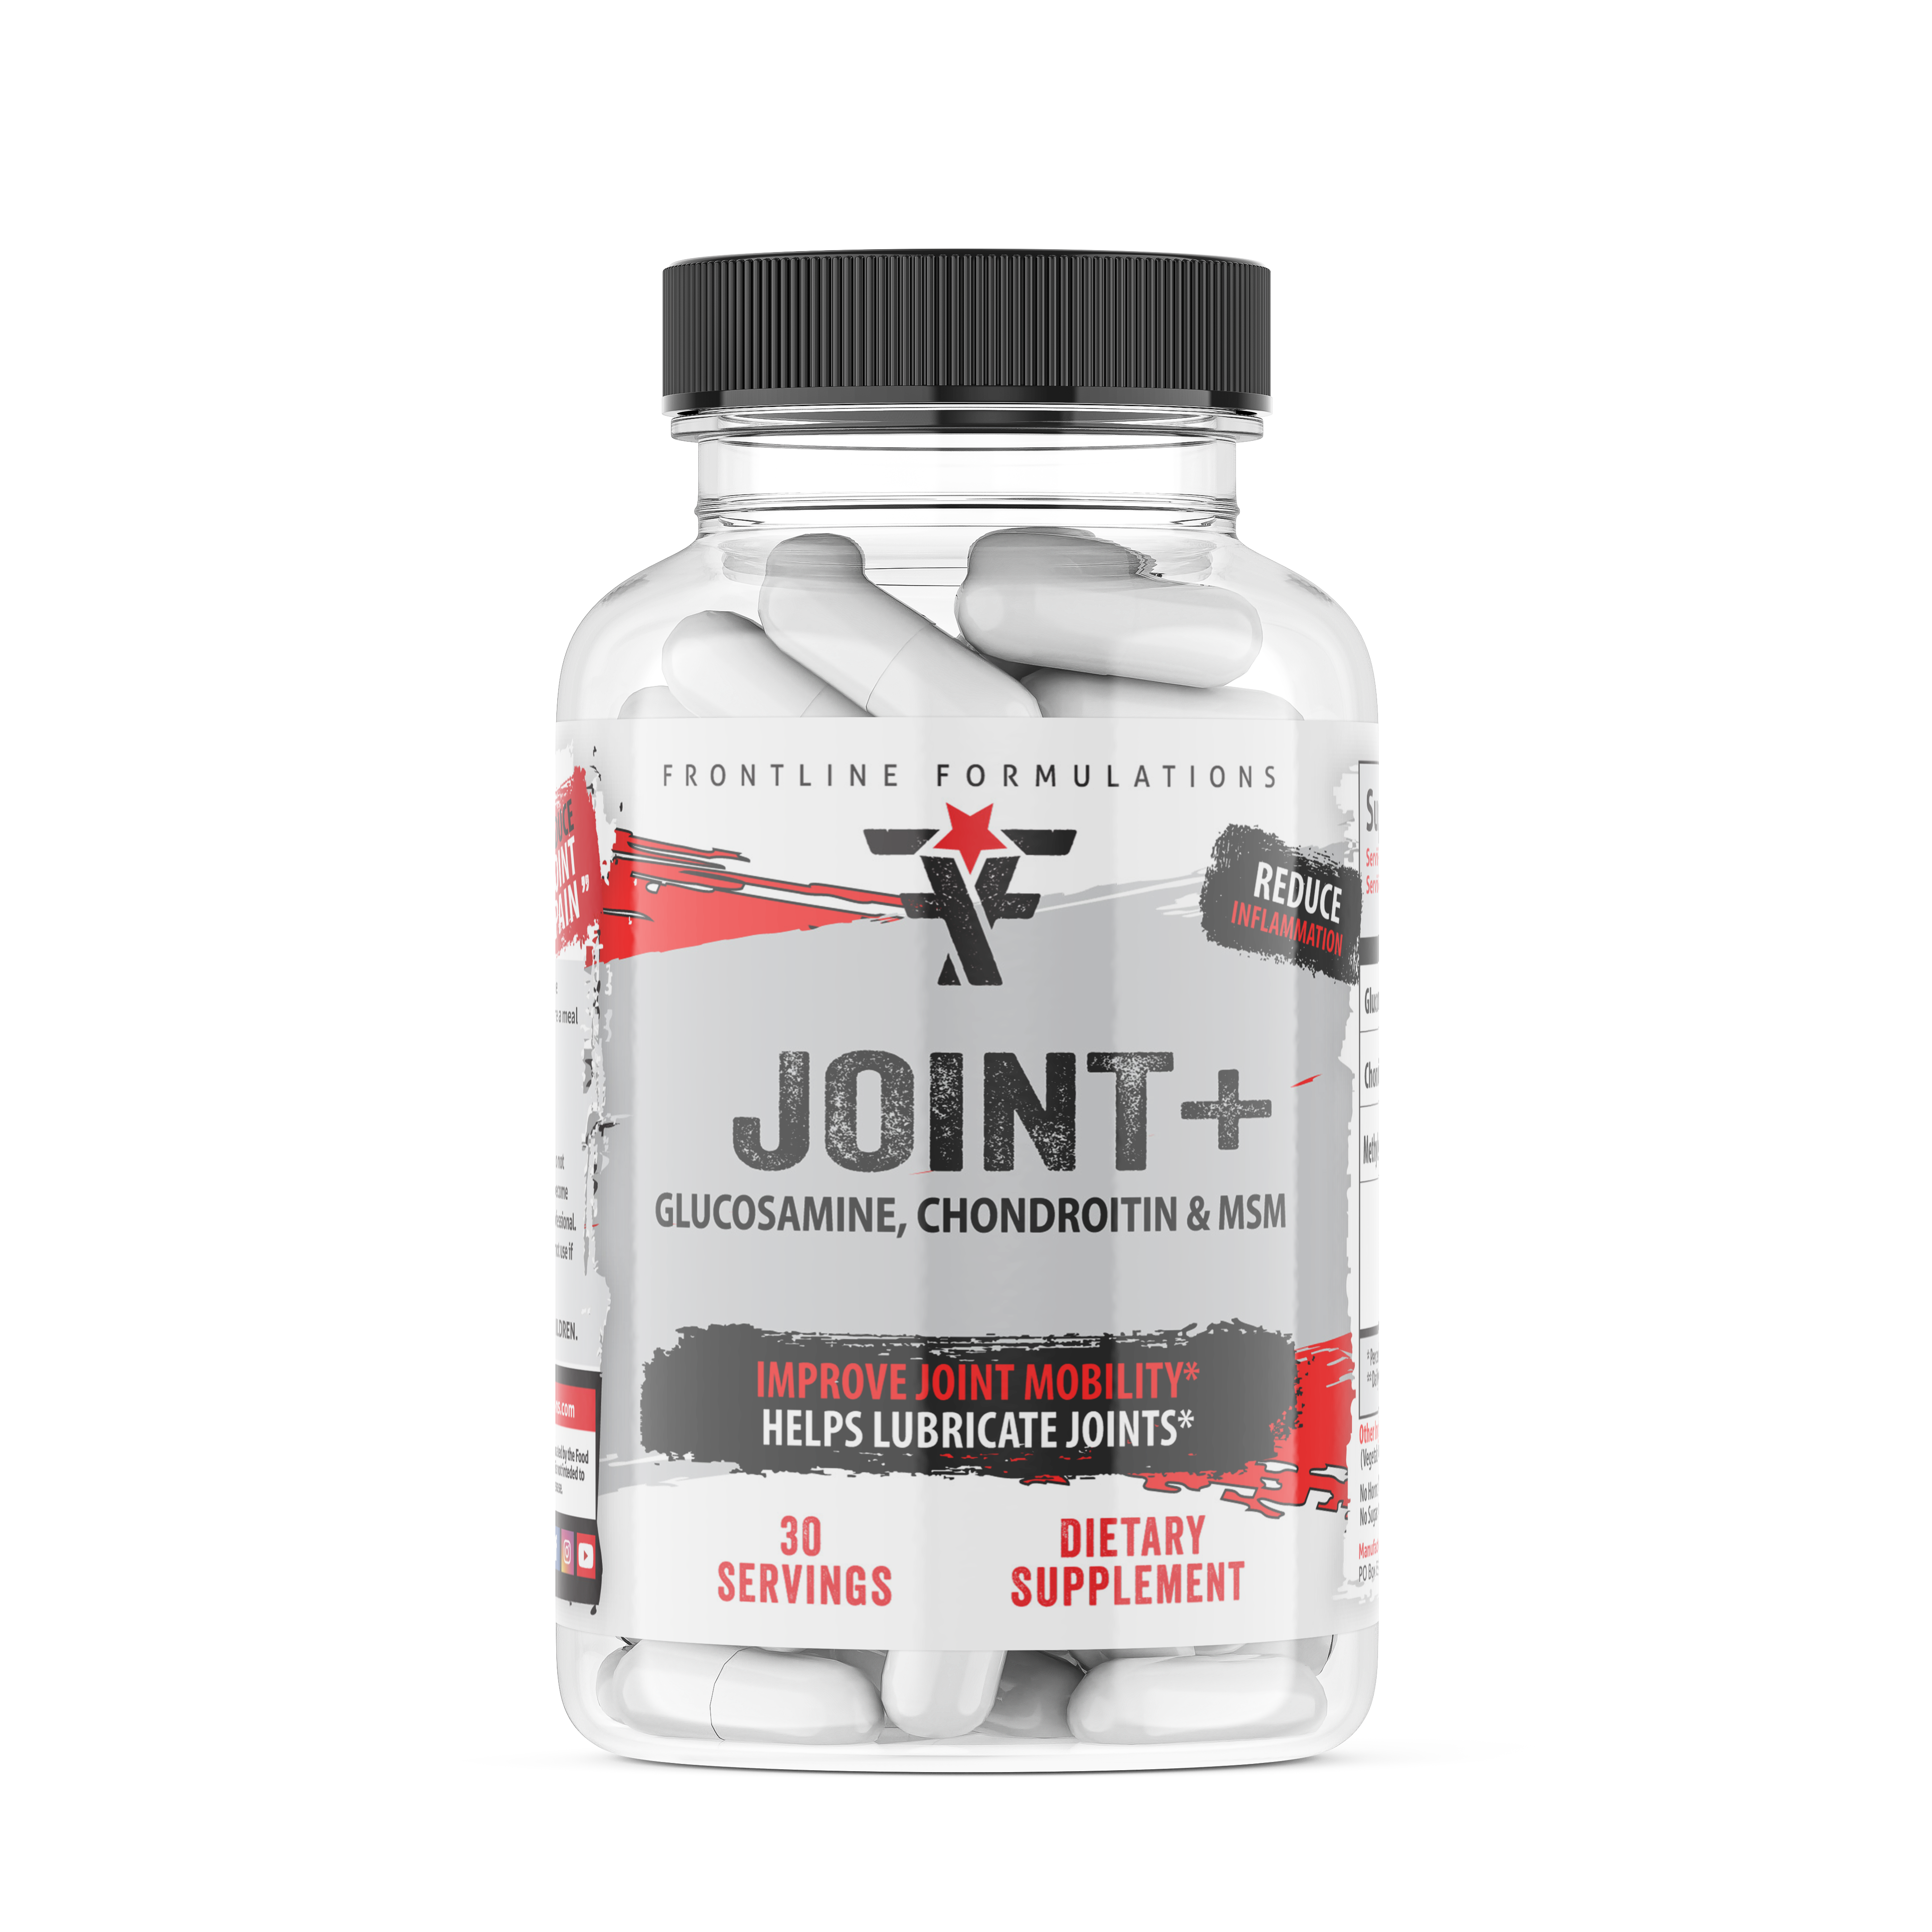 Joint+ Joint+ Glucosamine is used by the body to make other chemicals that build tendons, ligaments, cartilage, and the fluid that surrounds joints. Joints are cushioned by the fluid and cartilage around them. Taking glucosamine might increase the cartila